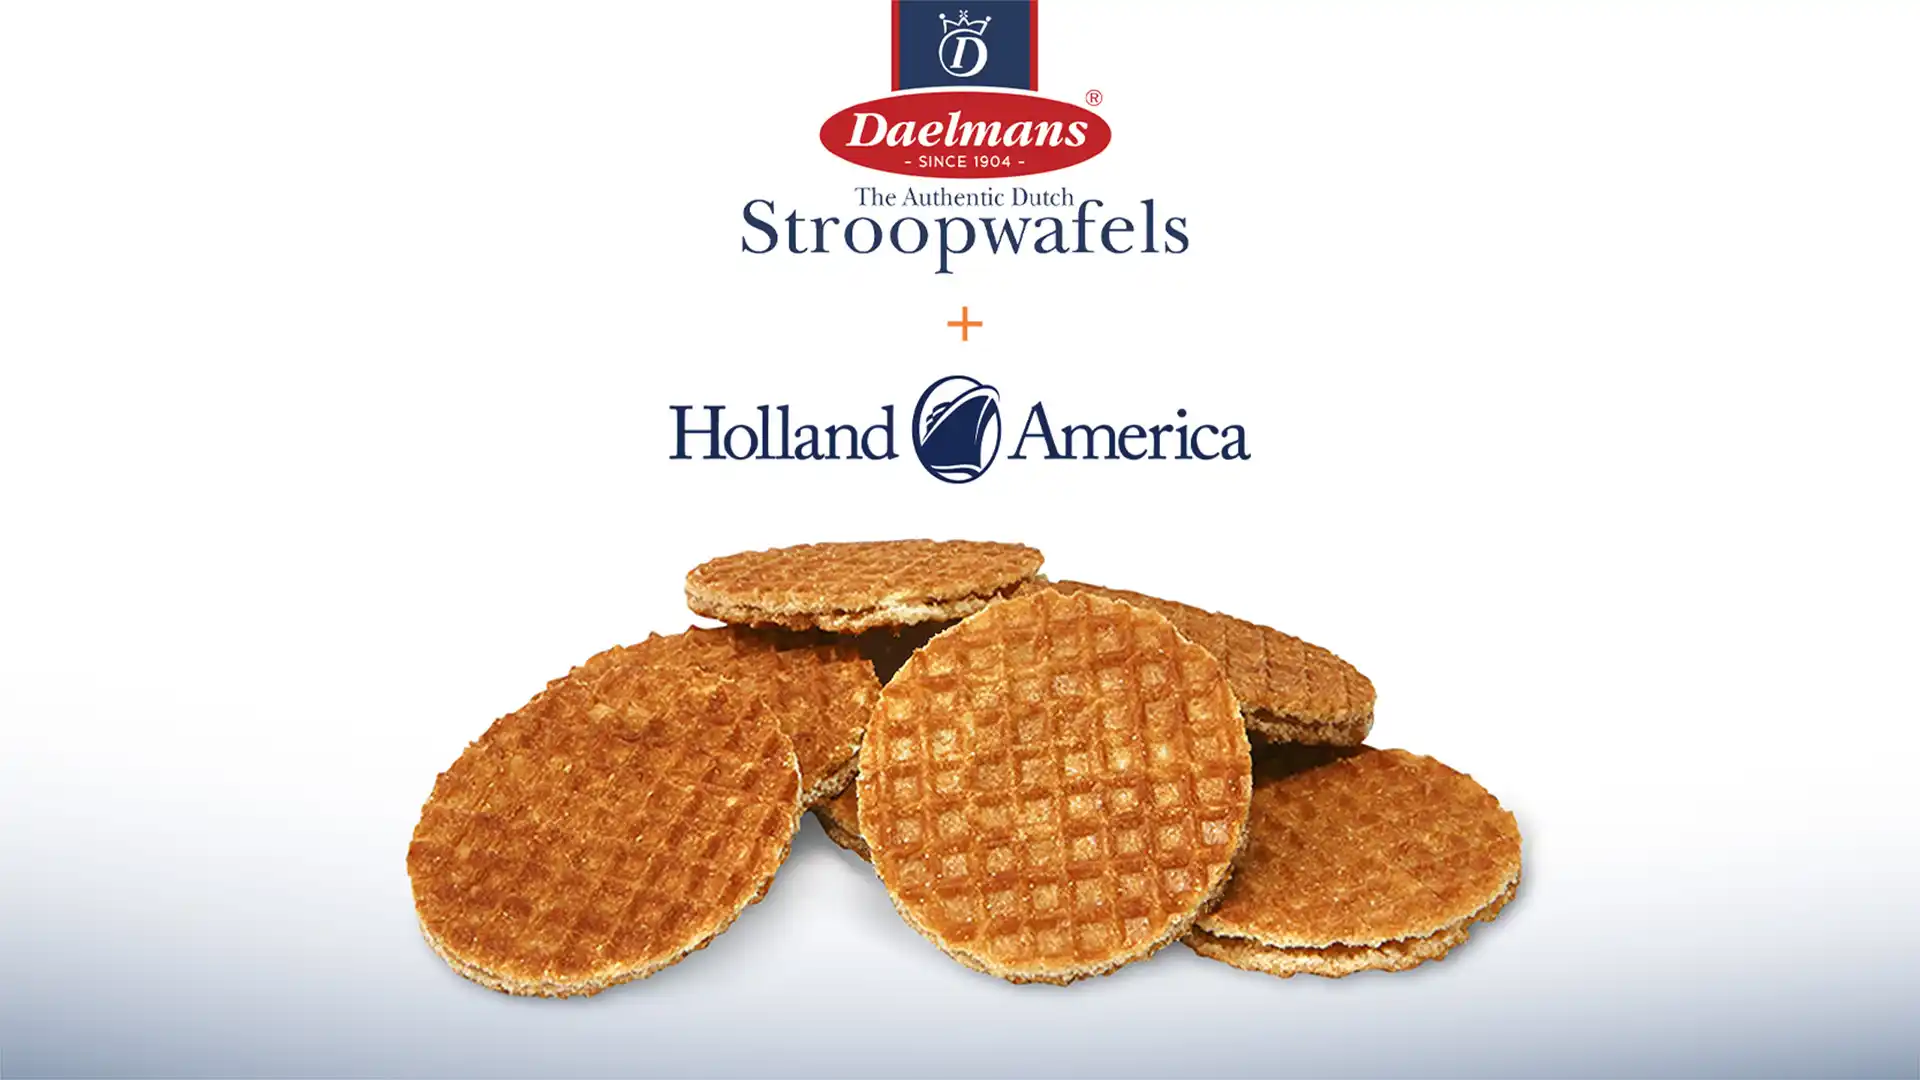 View of stroopwafels with Holland America Line and Daelmans logos above it.